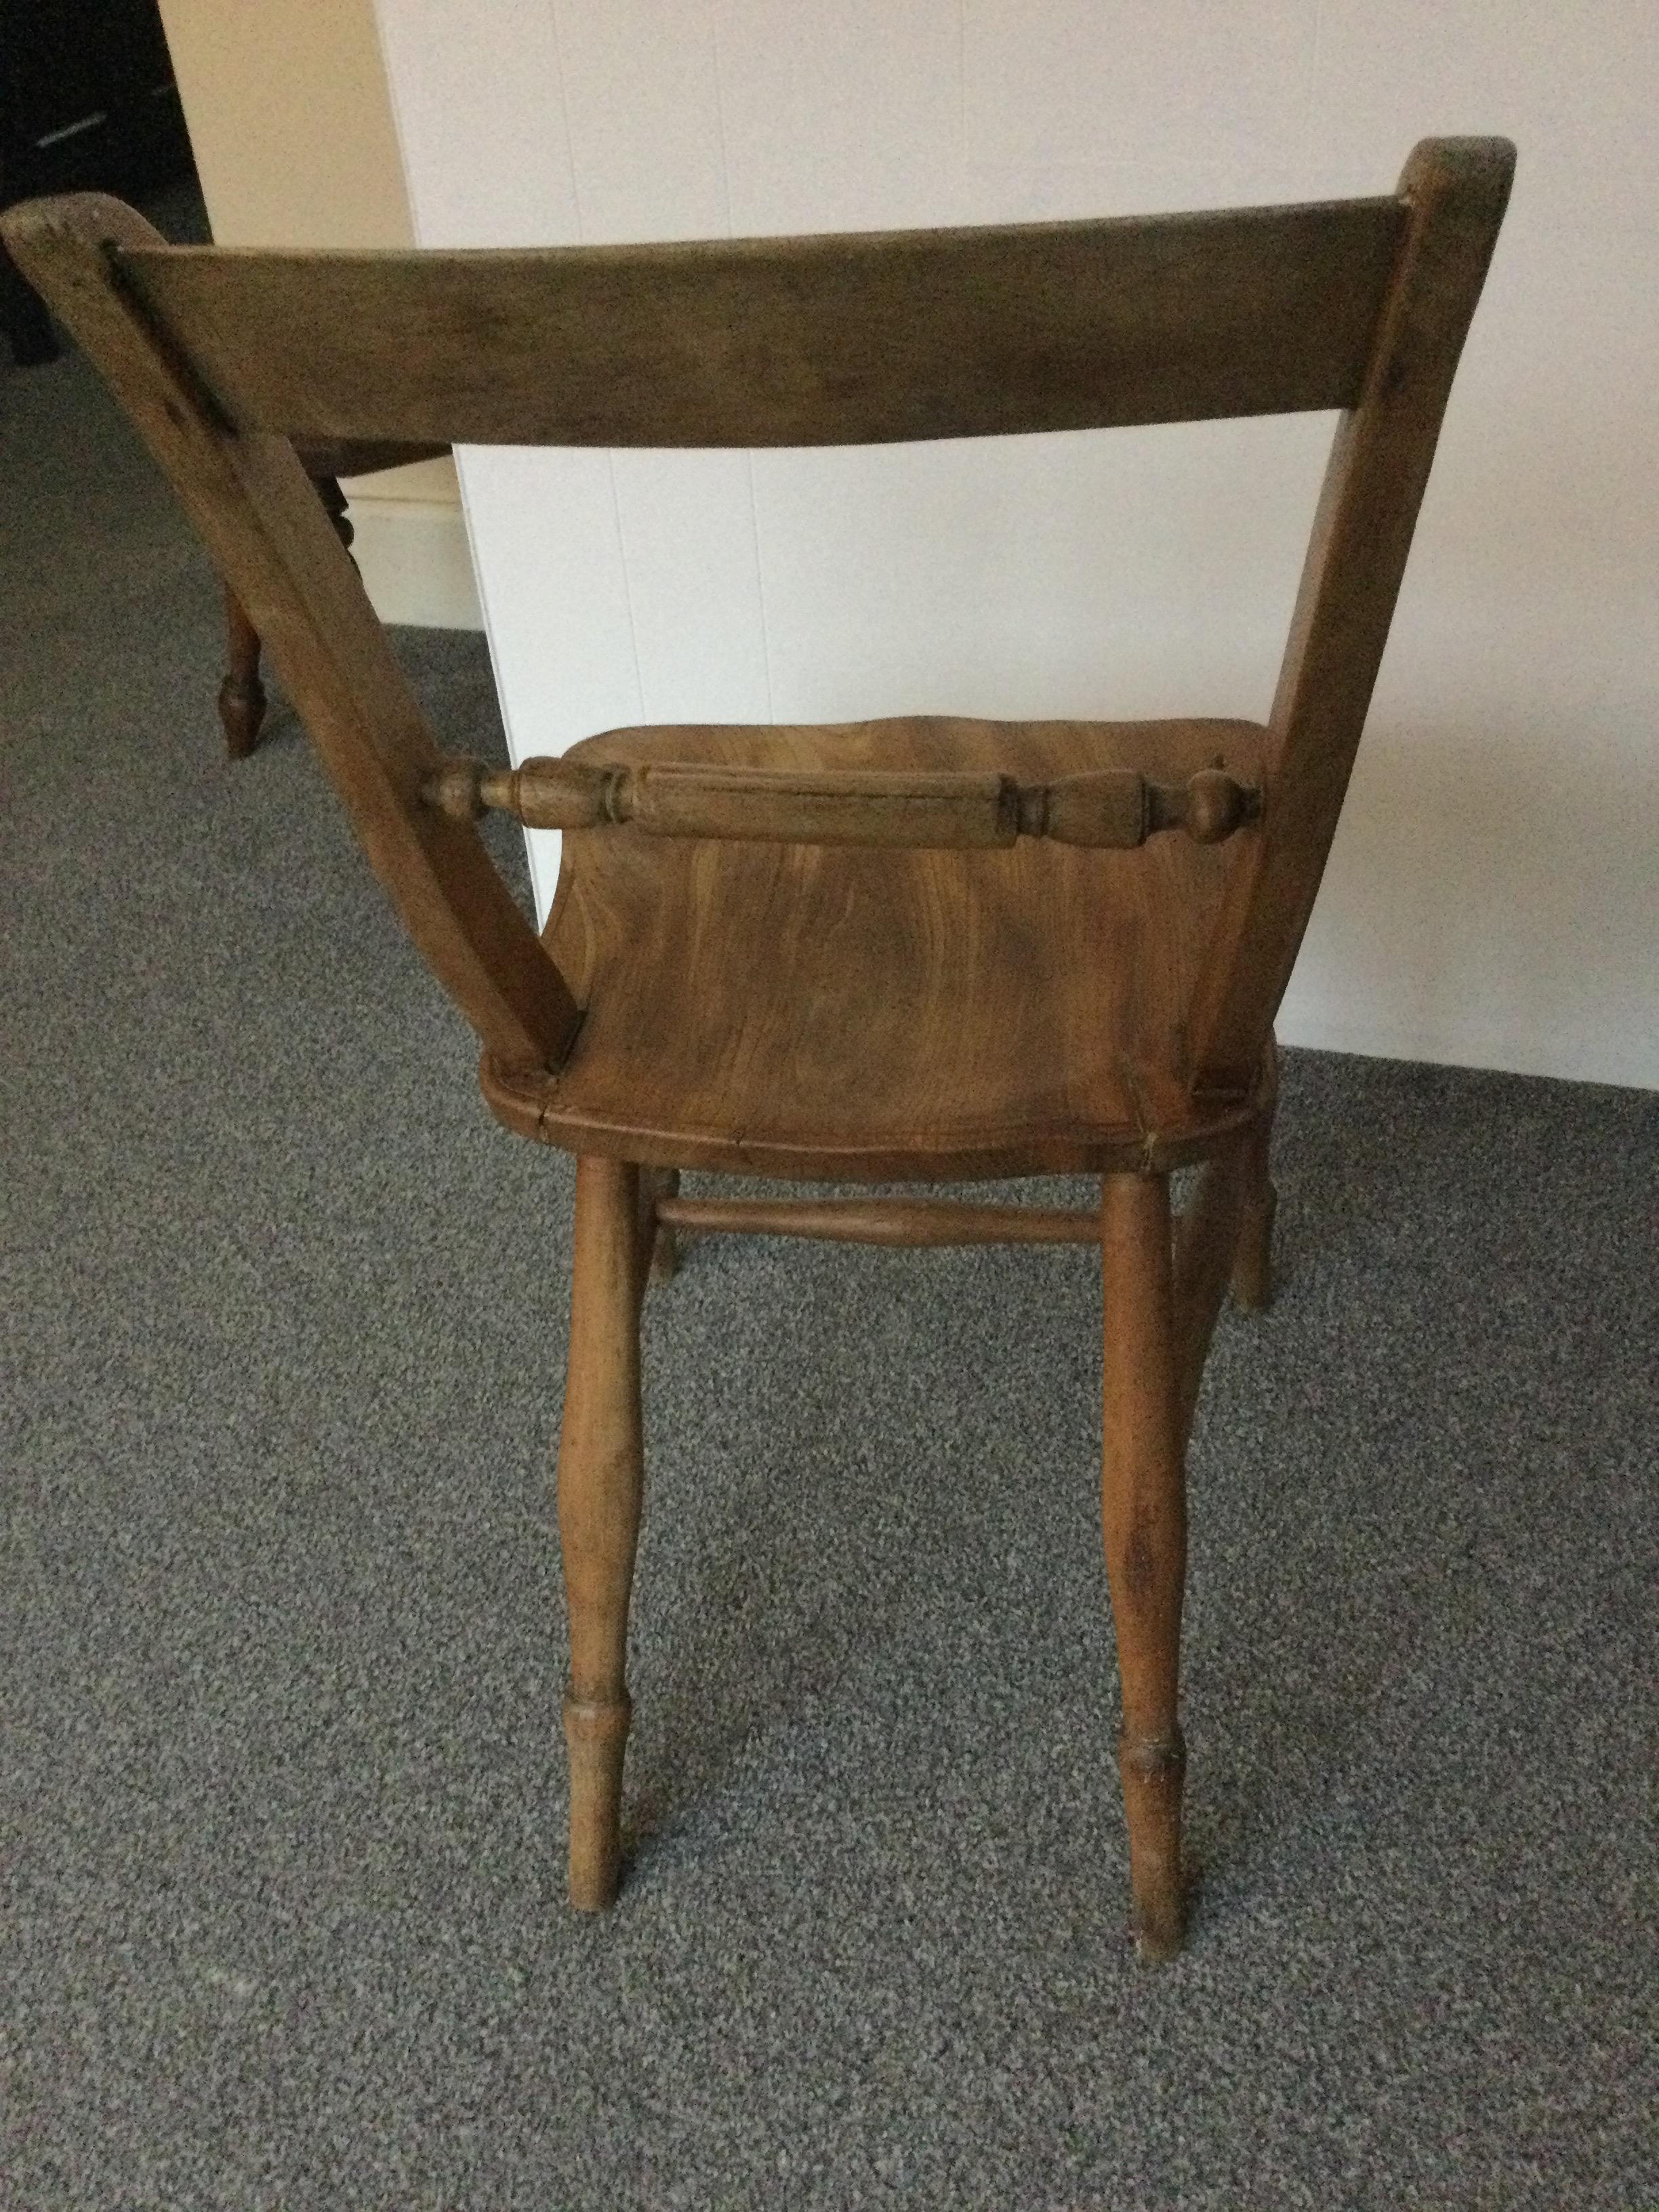 Antique small Oxford Chair - Image 2 of 3